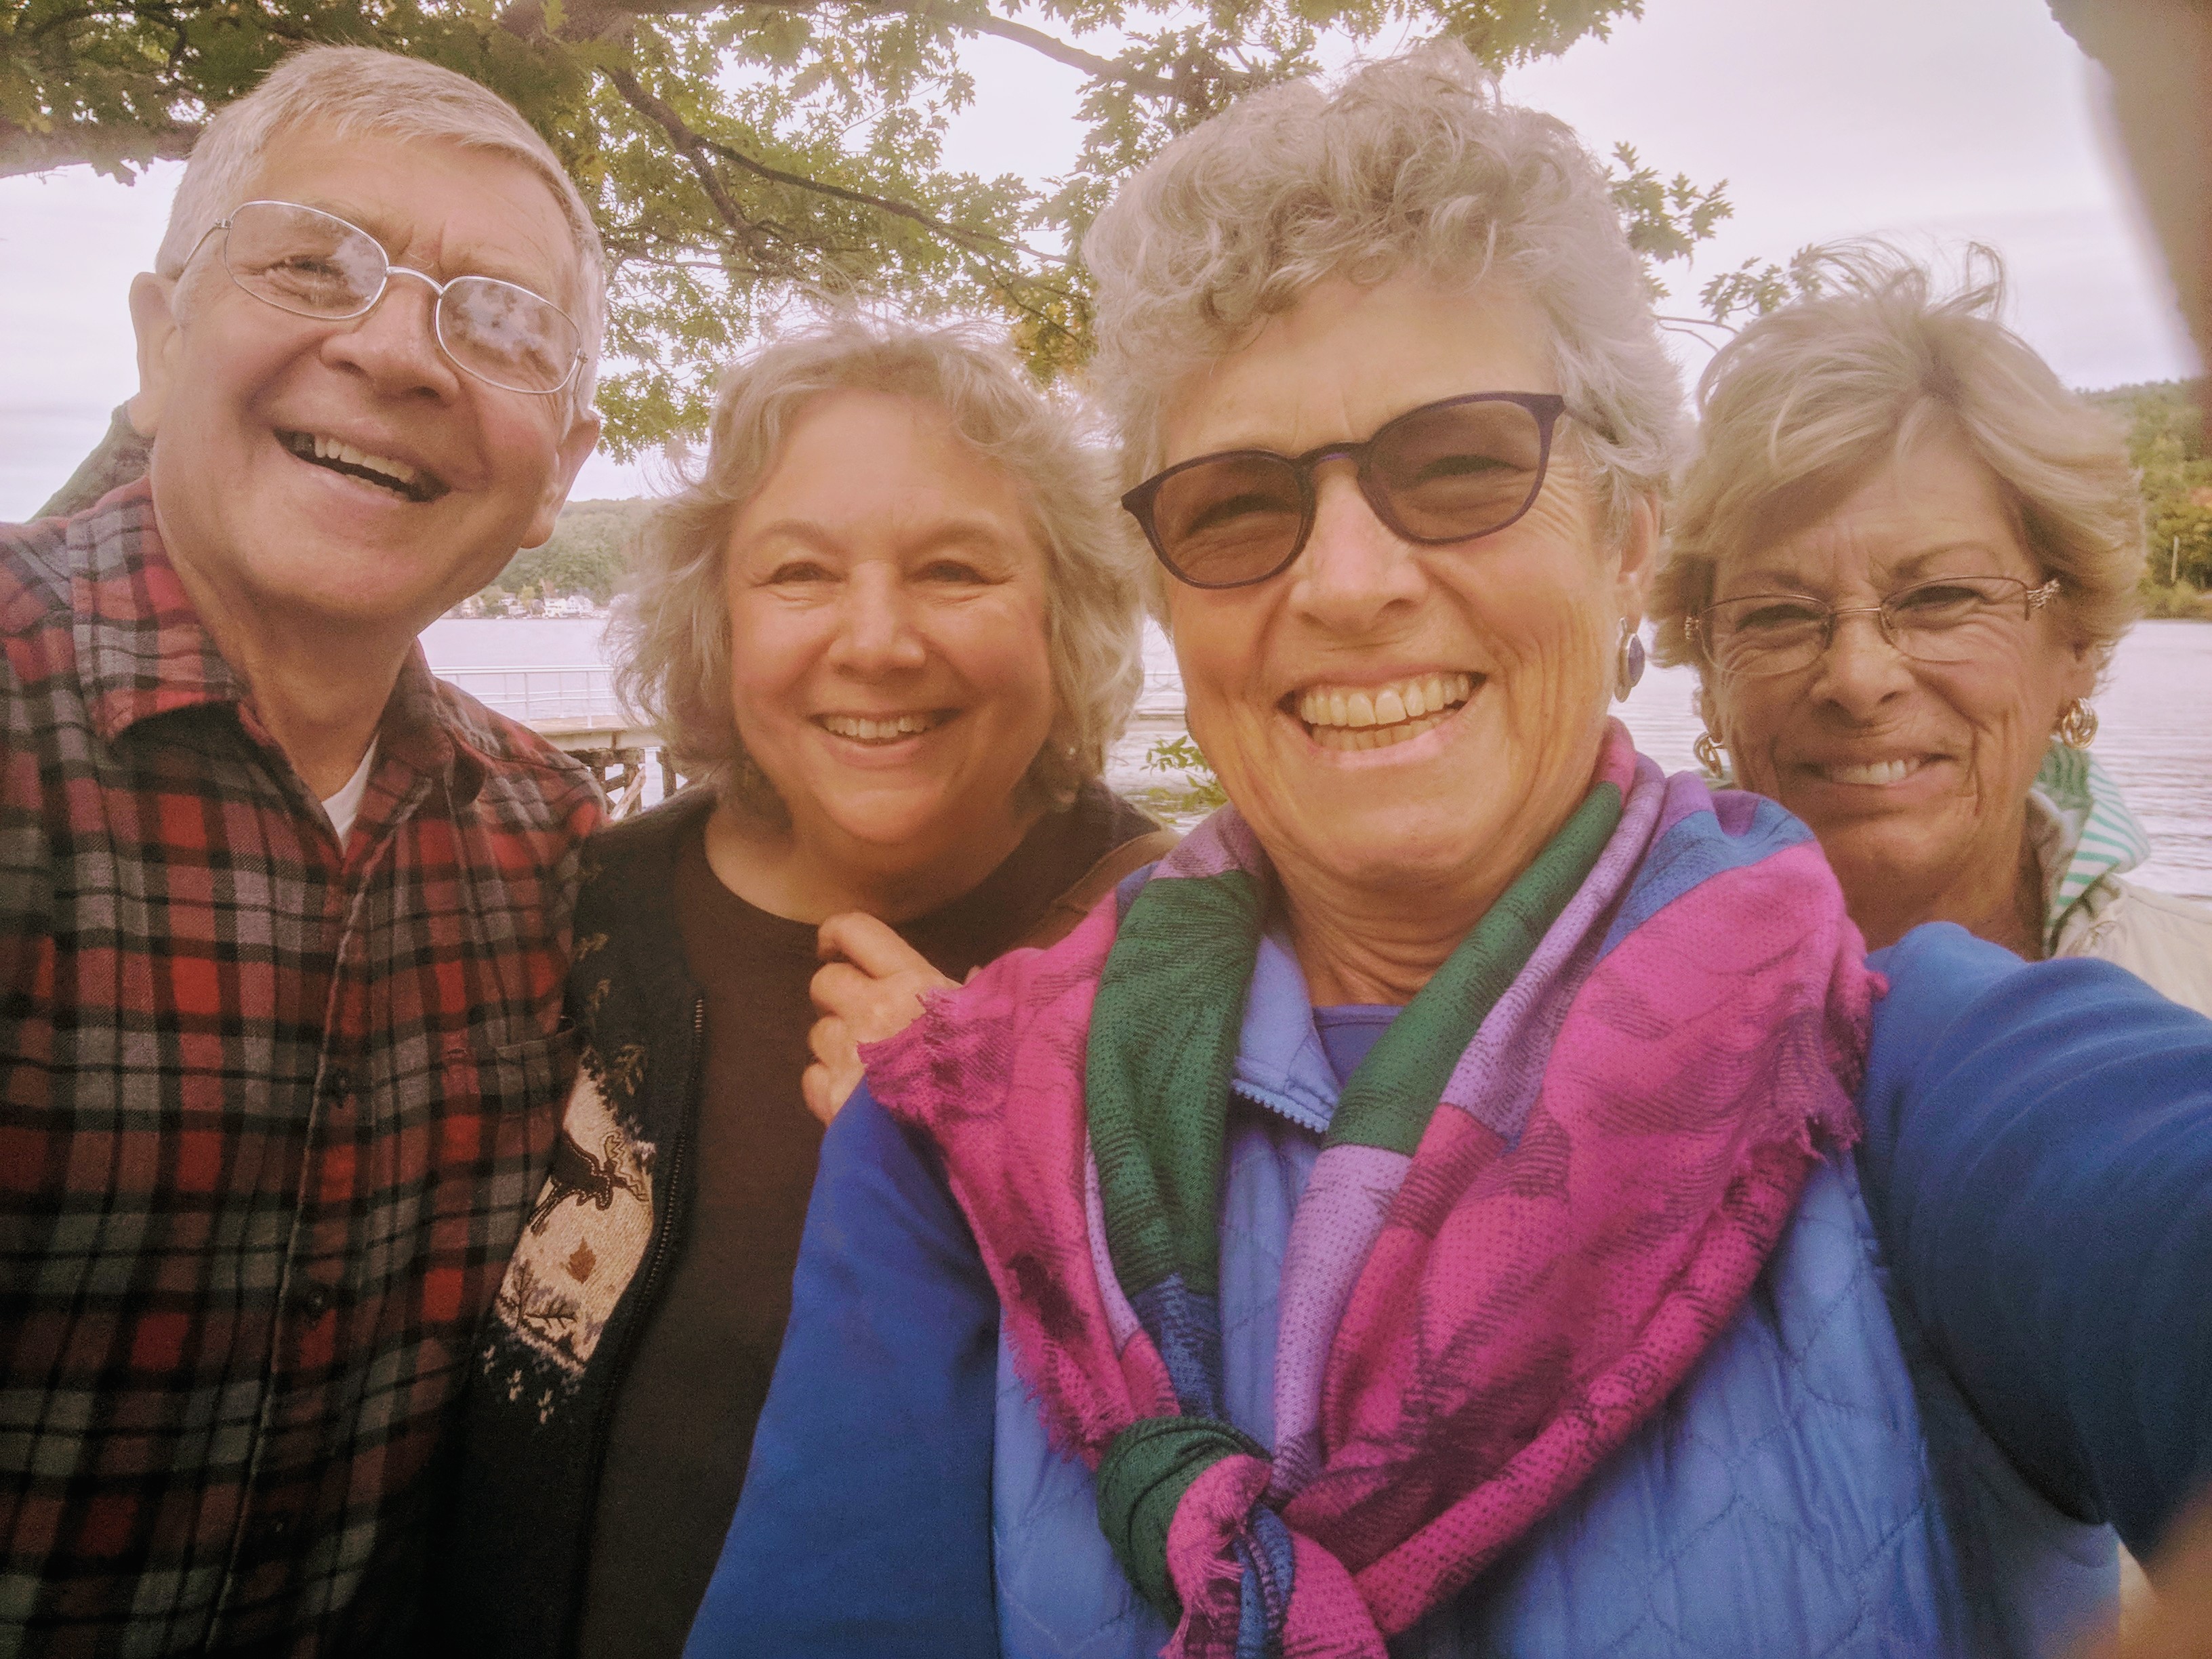 Oct--rendevous with cousin Sara, husband Steve, and sister Bev